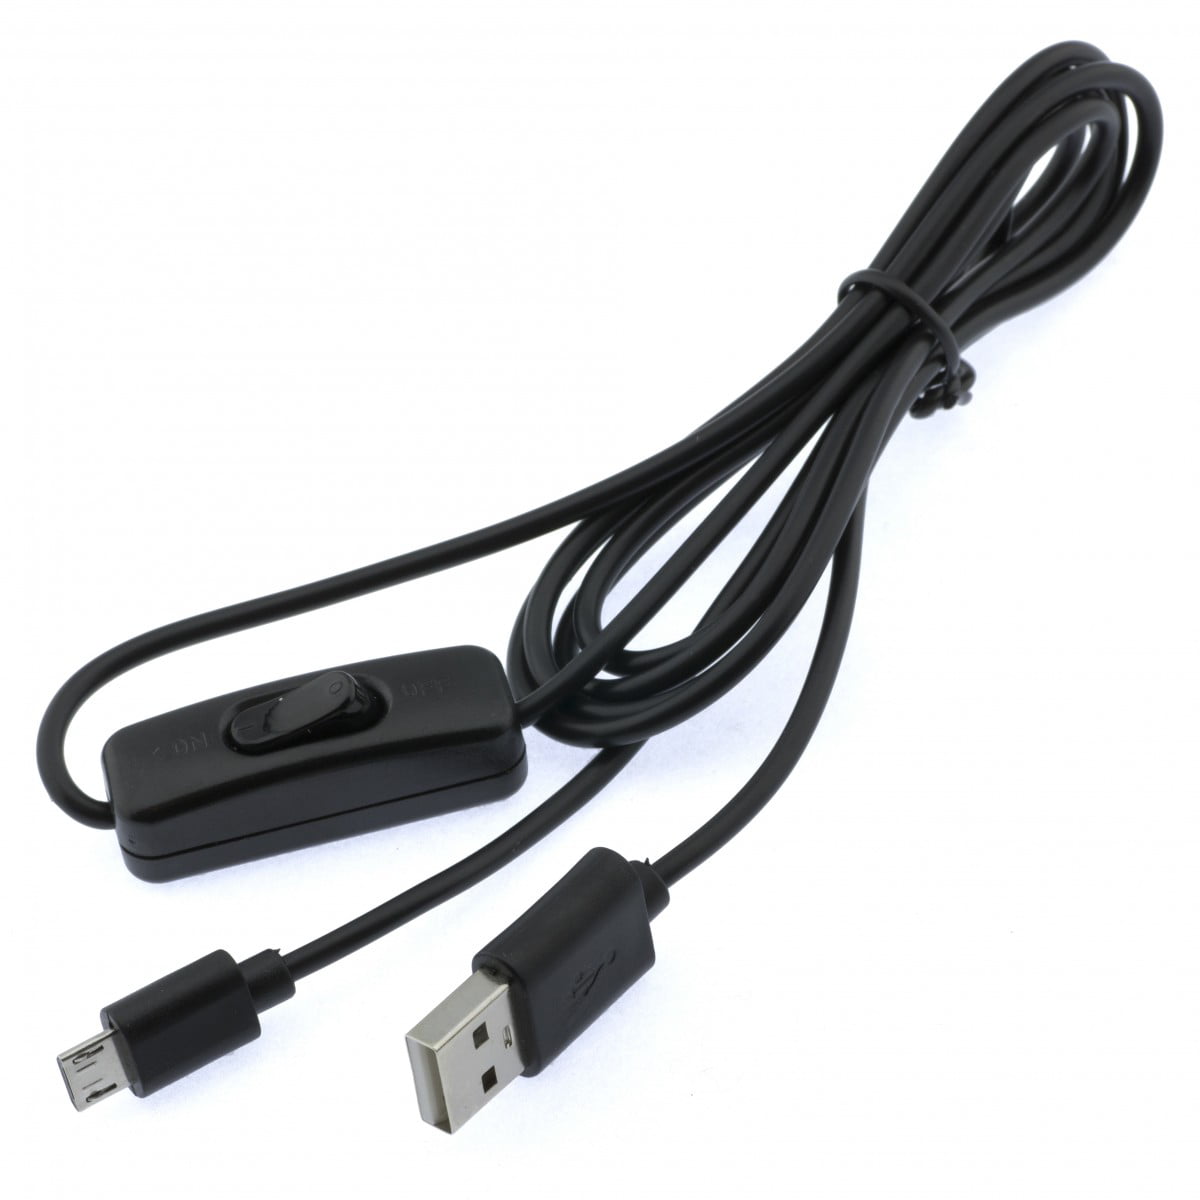 5v 2A Micro USB Charger Cable Adapter Power Supply Cord On Off Raspberry Pi - Walmart.com